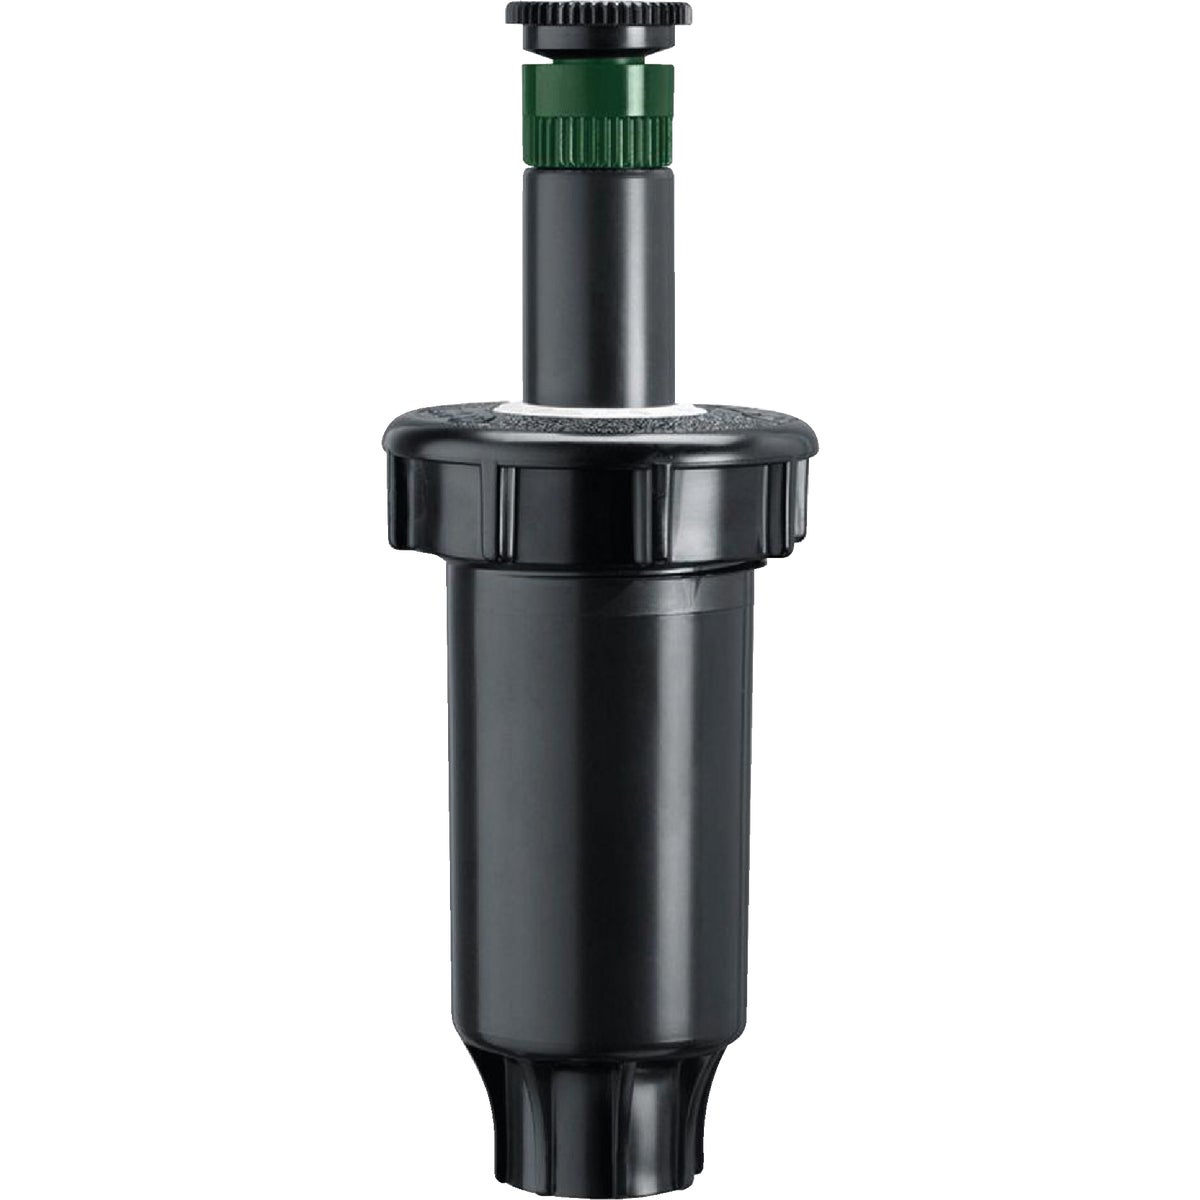 Item 704190, The new Orbit Professional Series with adjustable nozzle, brings rugged 